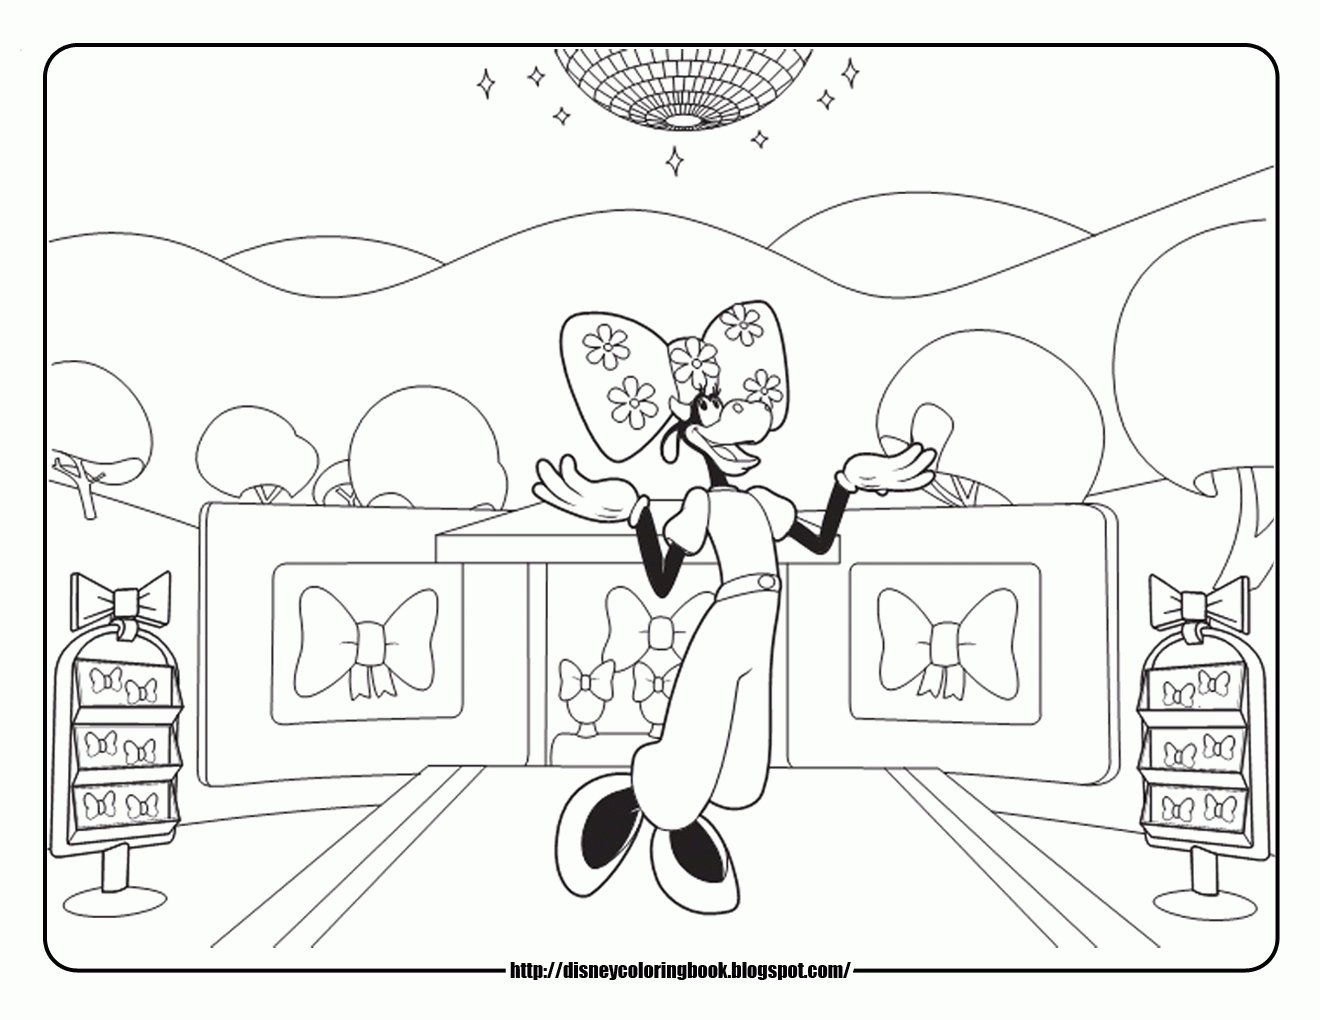 Free Coloring Page Of Mickey Mouse Clubhouse, Download Free Coloring ...